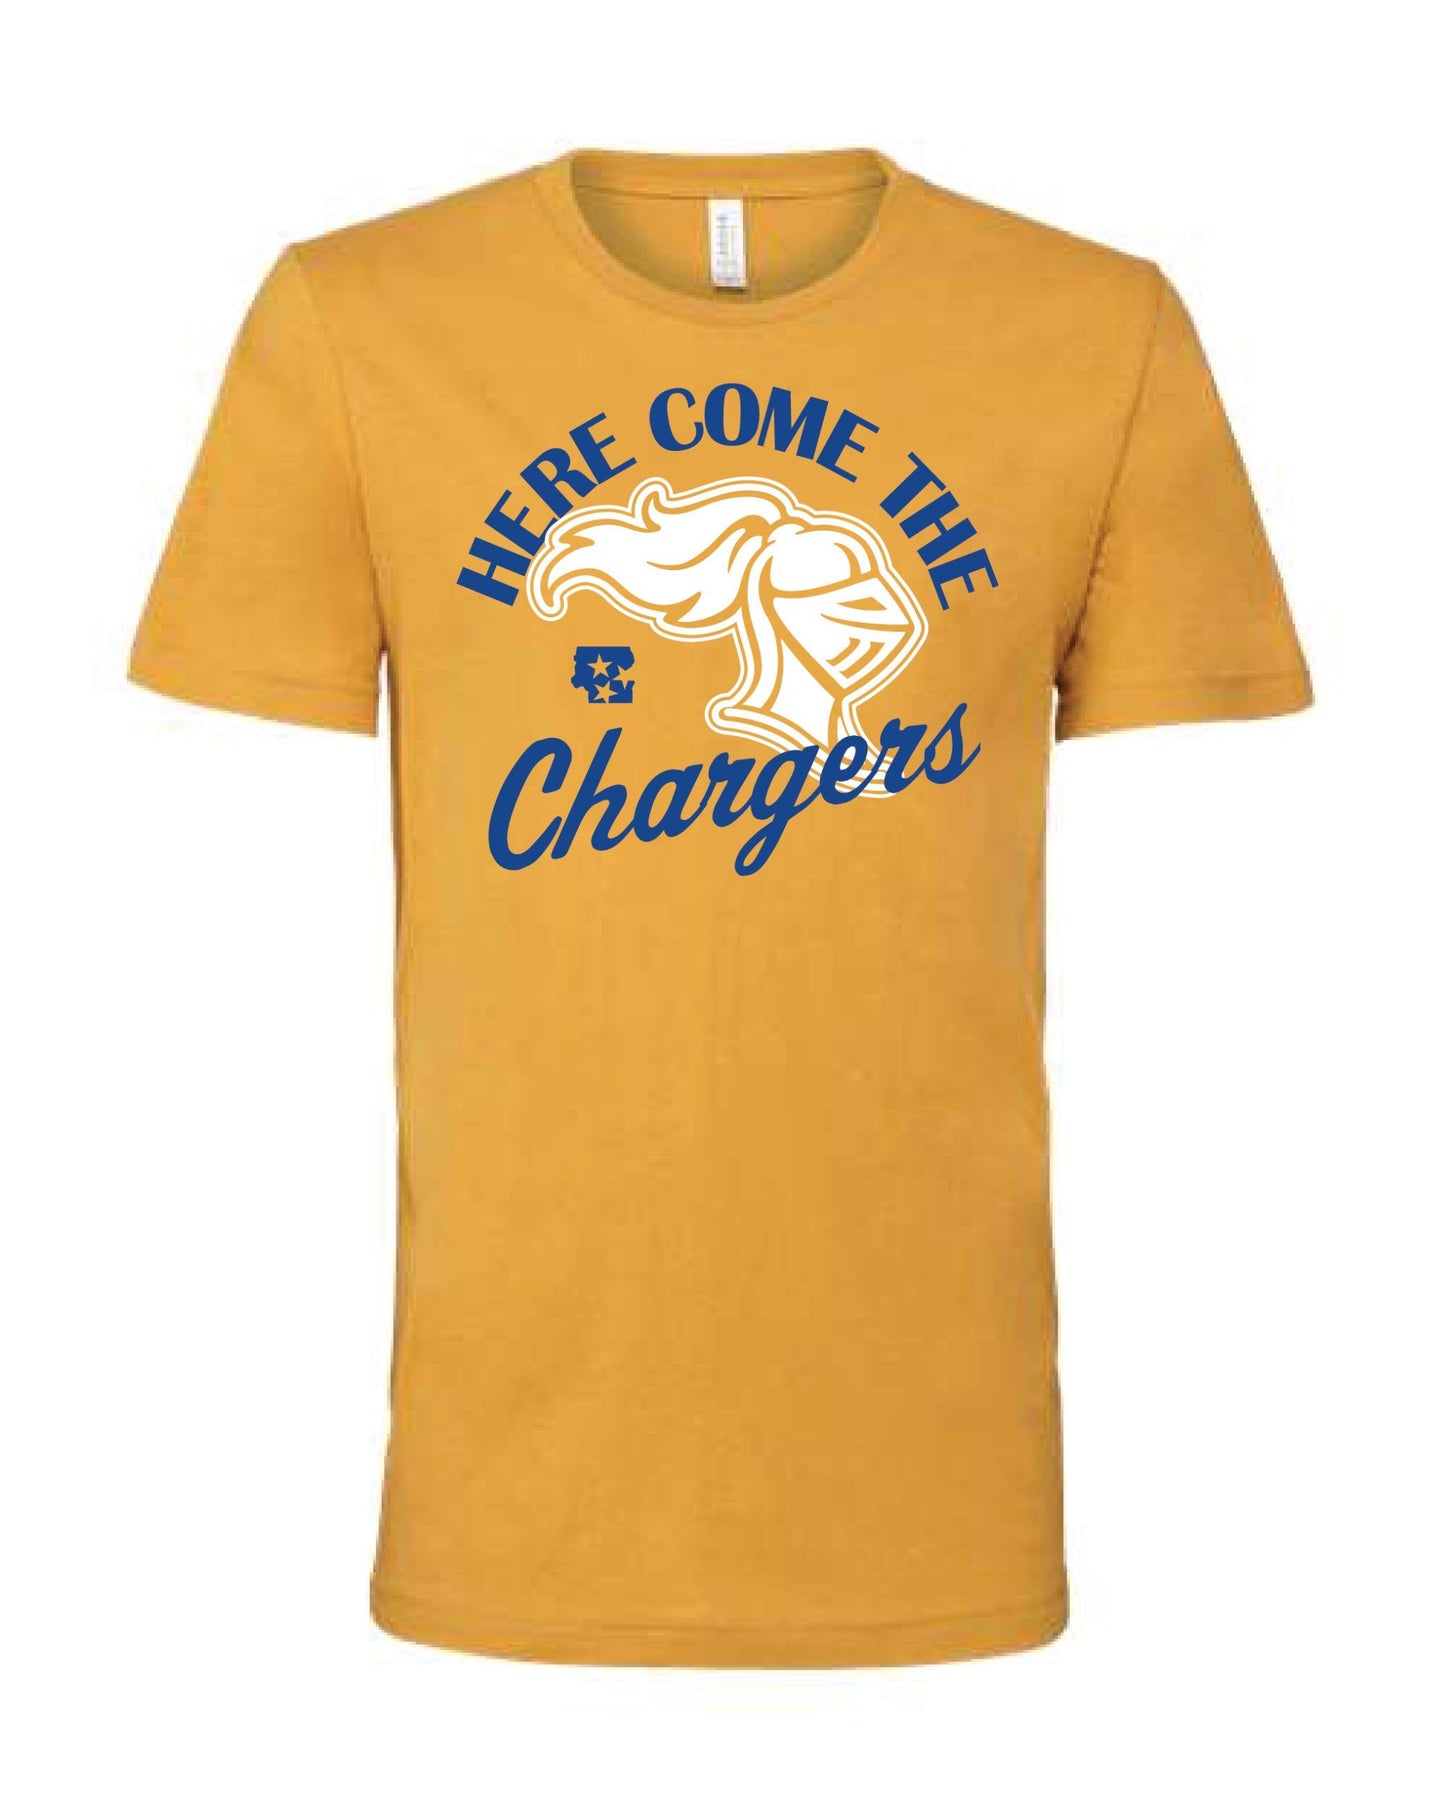 Here Come The Chargers Tee